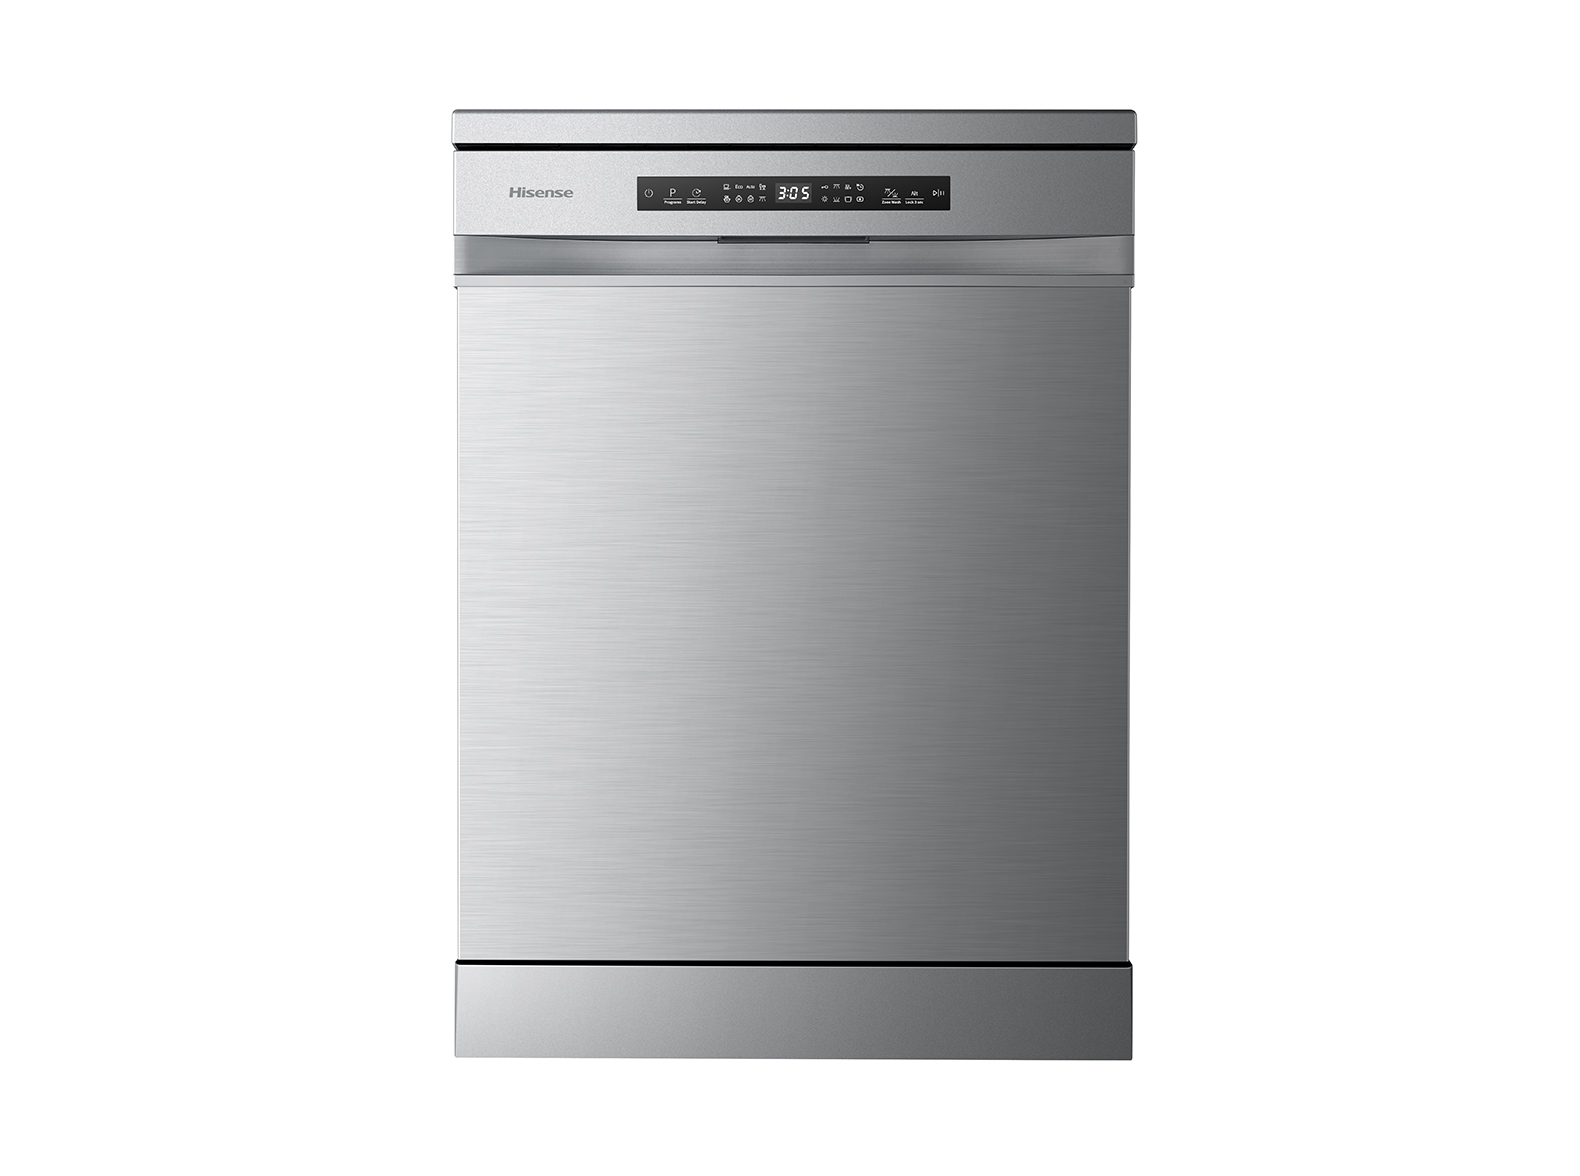 Stainless Steel Dishwasher with 14 Place Settings